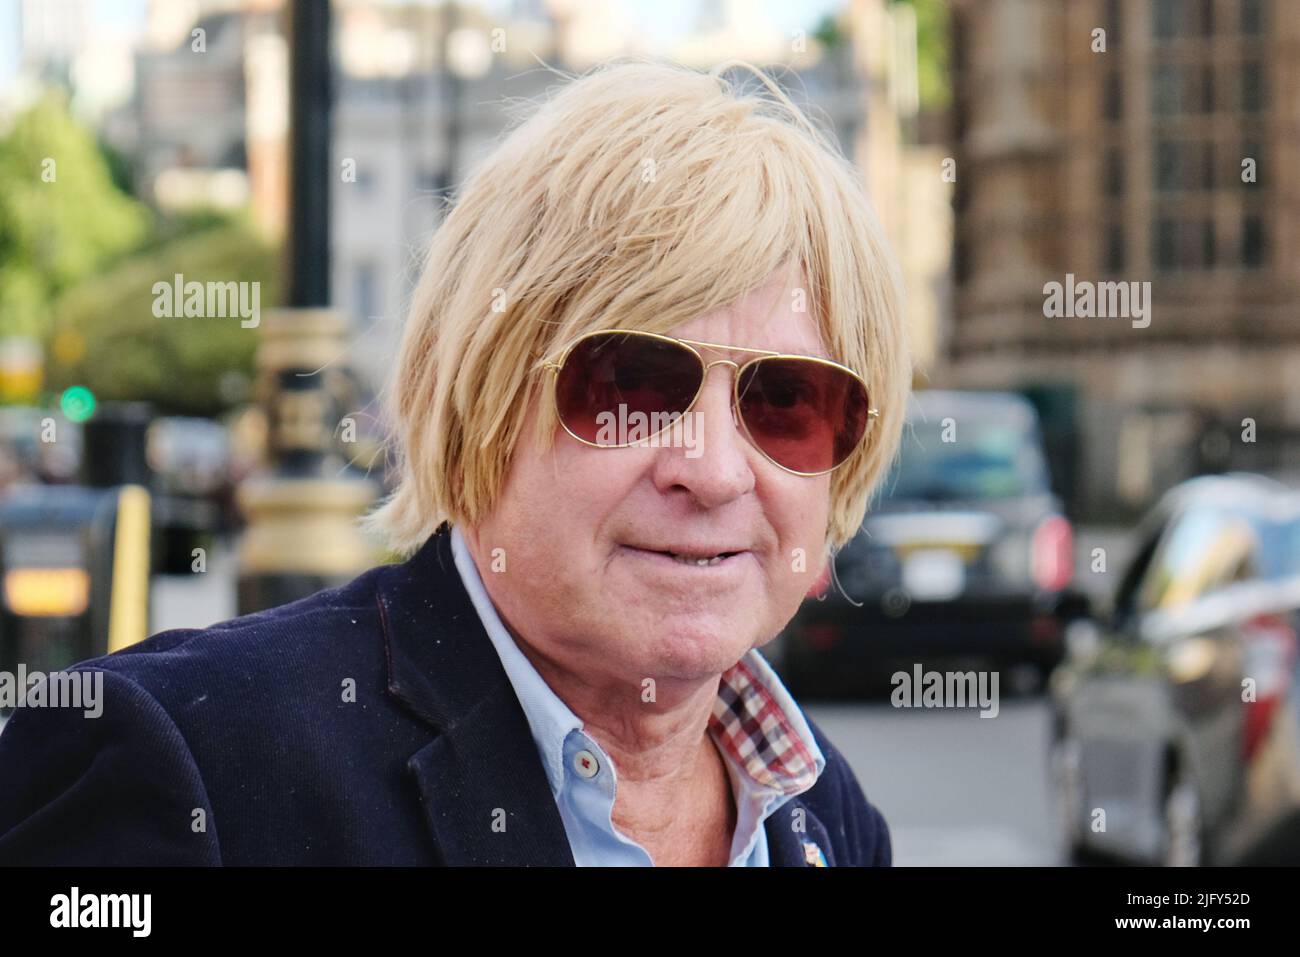 London, UK, 5th July, 2022. MP for Lichfield, Michael Fabricant leaves the Parliamentary complex after shock resignations of two cabinet members, chancellor Rishi Sunak and health secretary Sajid Javid.  Credit: Eleventh Hour Photography/Alamy Live News Stock Photo